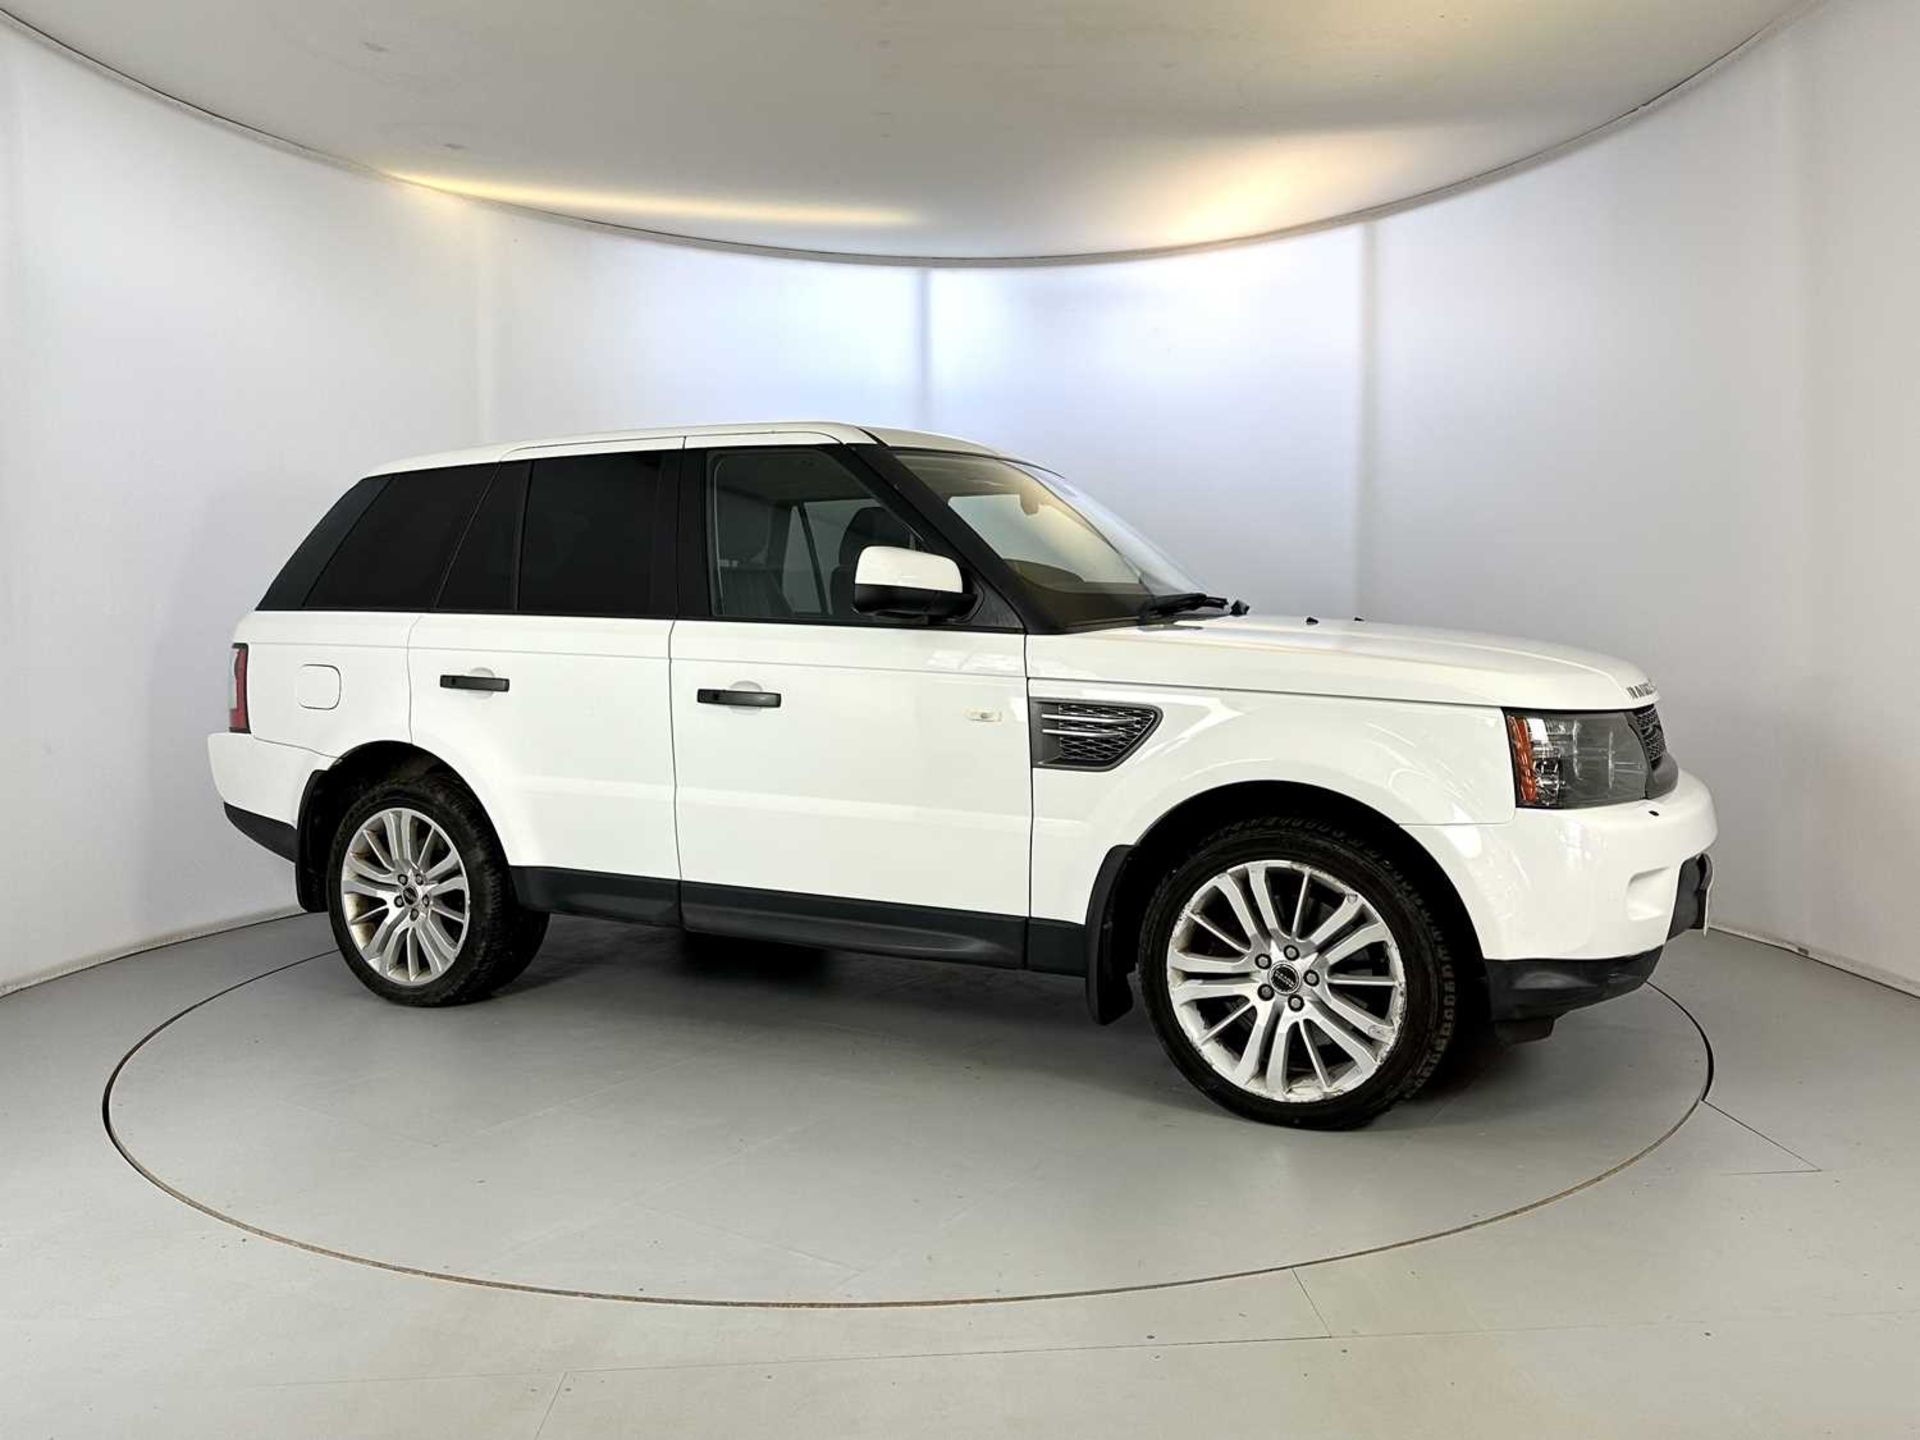 2010 Land Rover Range Rover Sport - Image 12 of 34